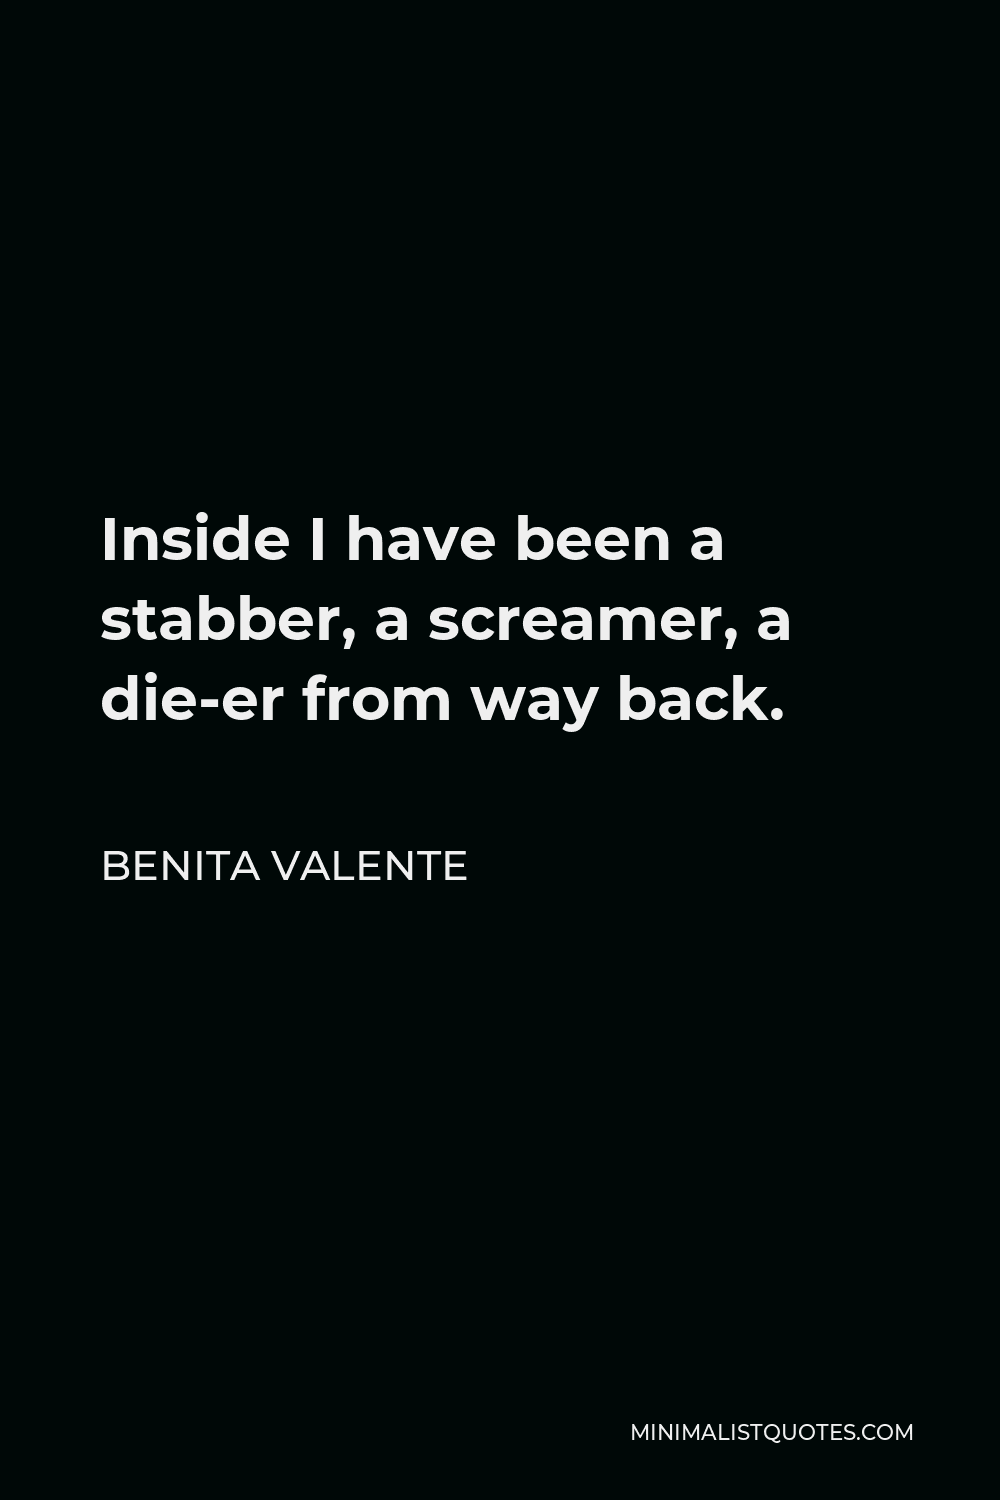 Benita Valente Quote - Inside I have been a stabber, a screamer, a die-er from way back.